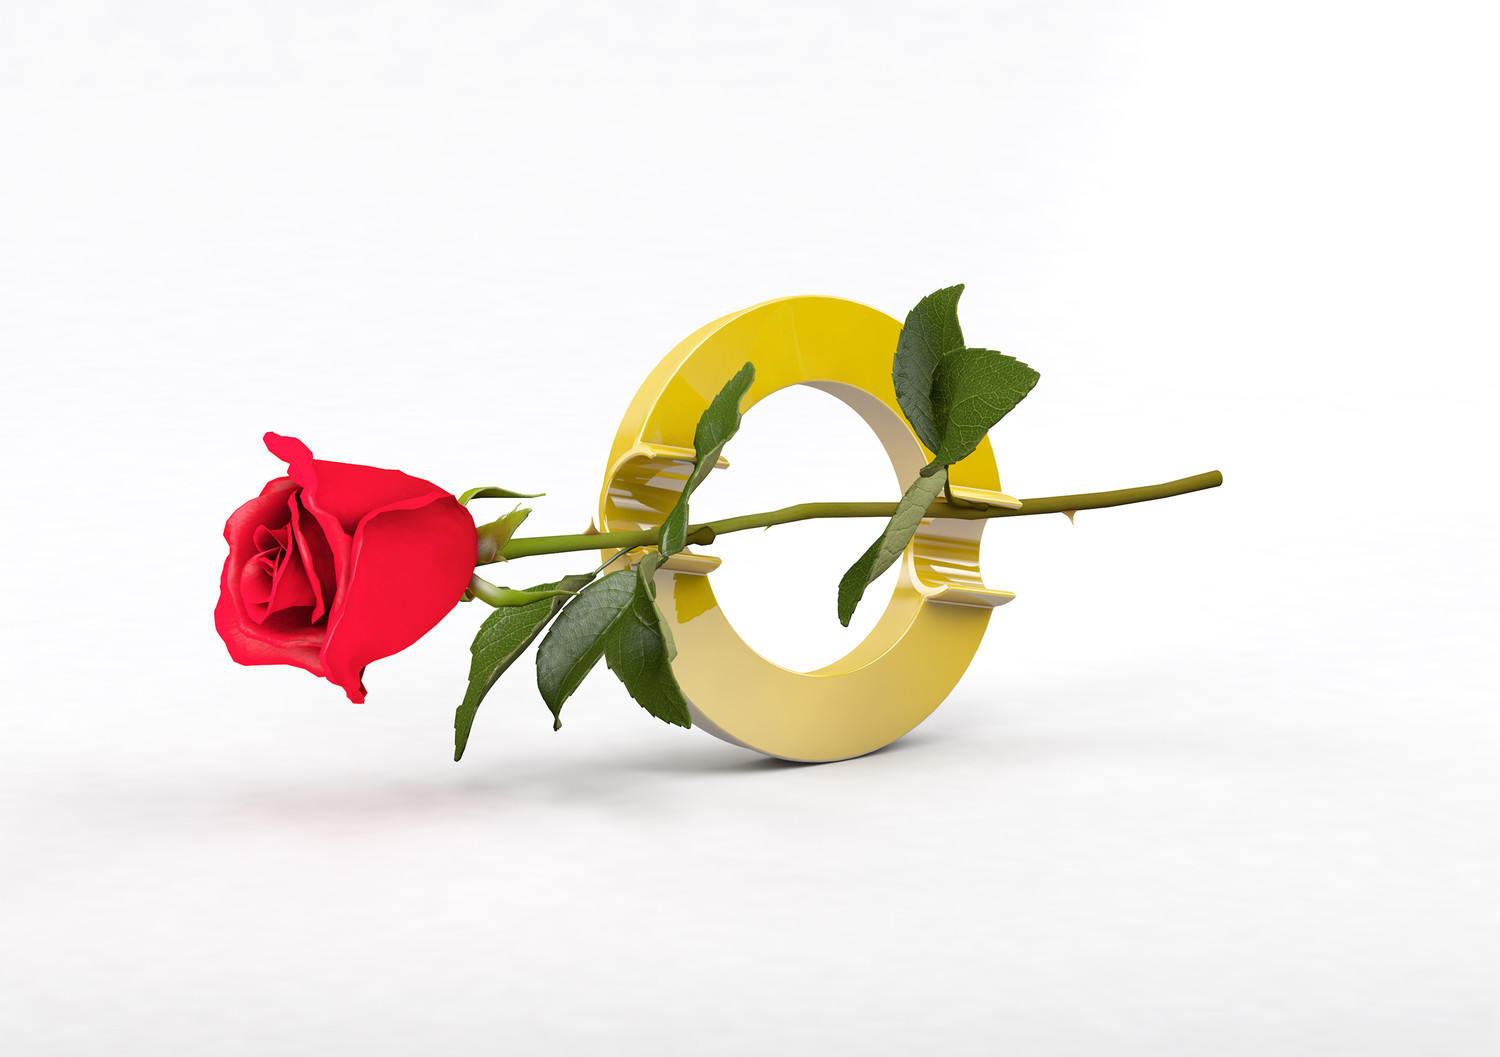 Versatile: the DAHLE CIRCLE MEGA magnet can also be used as a vase